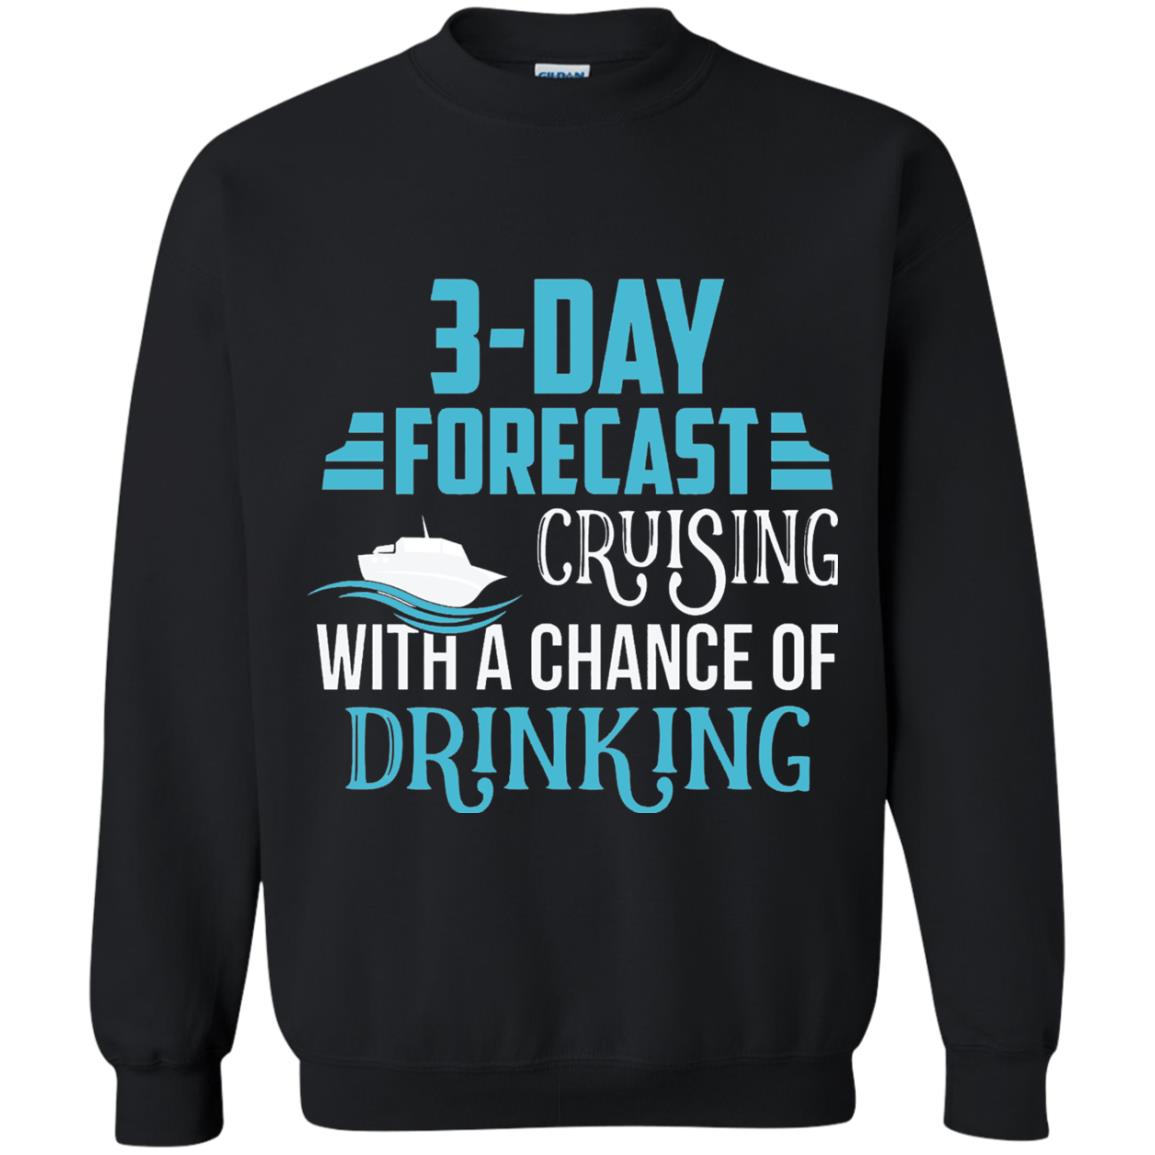 Funny Cruise T-shirt Forecast Cruising With A Chance